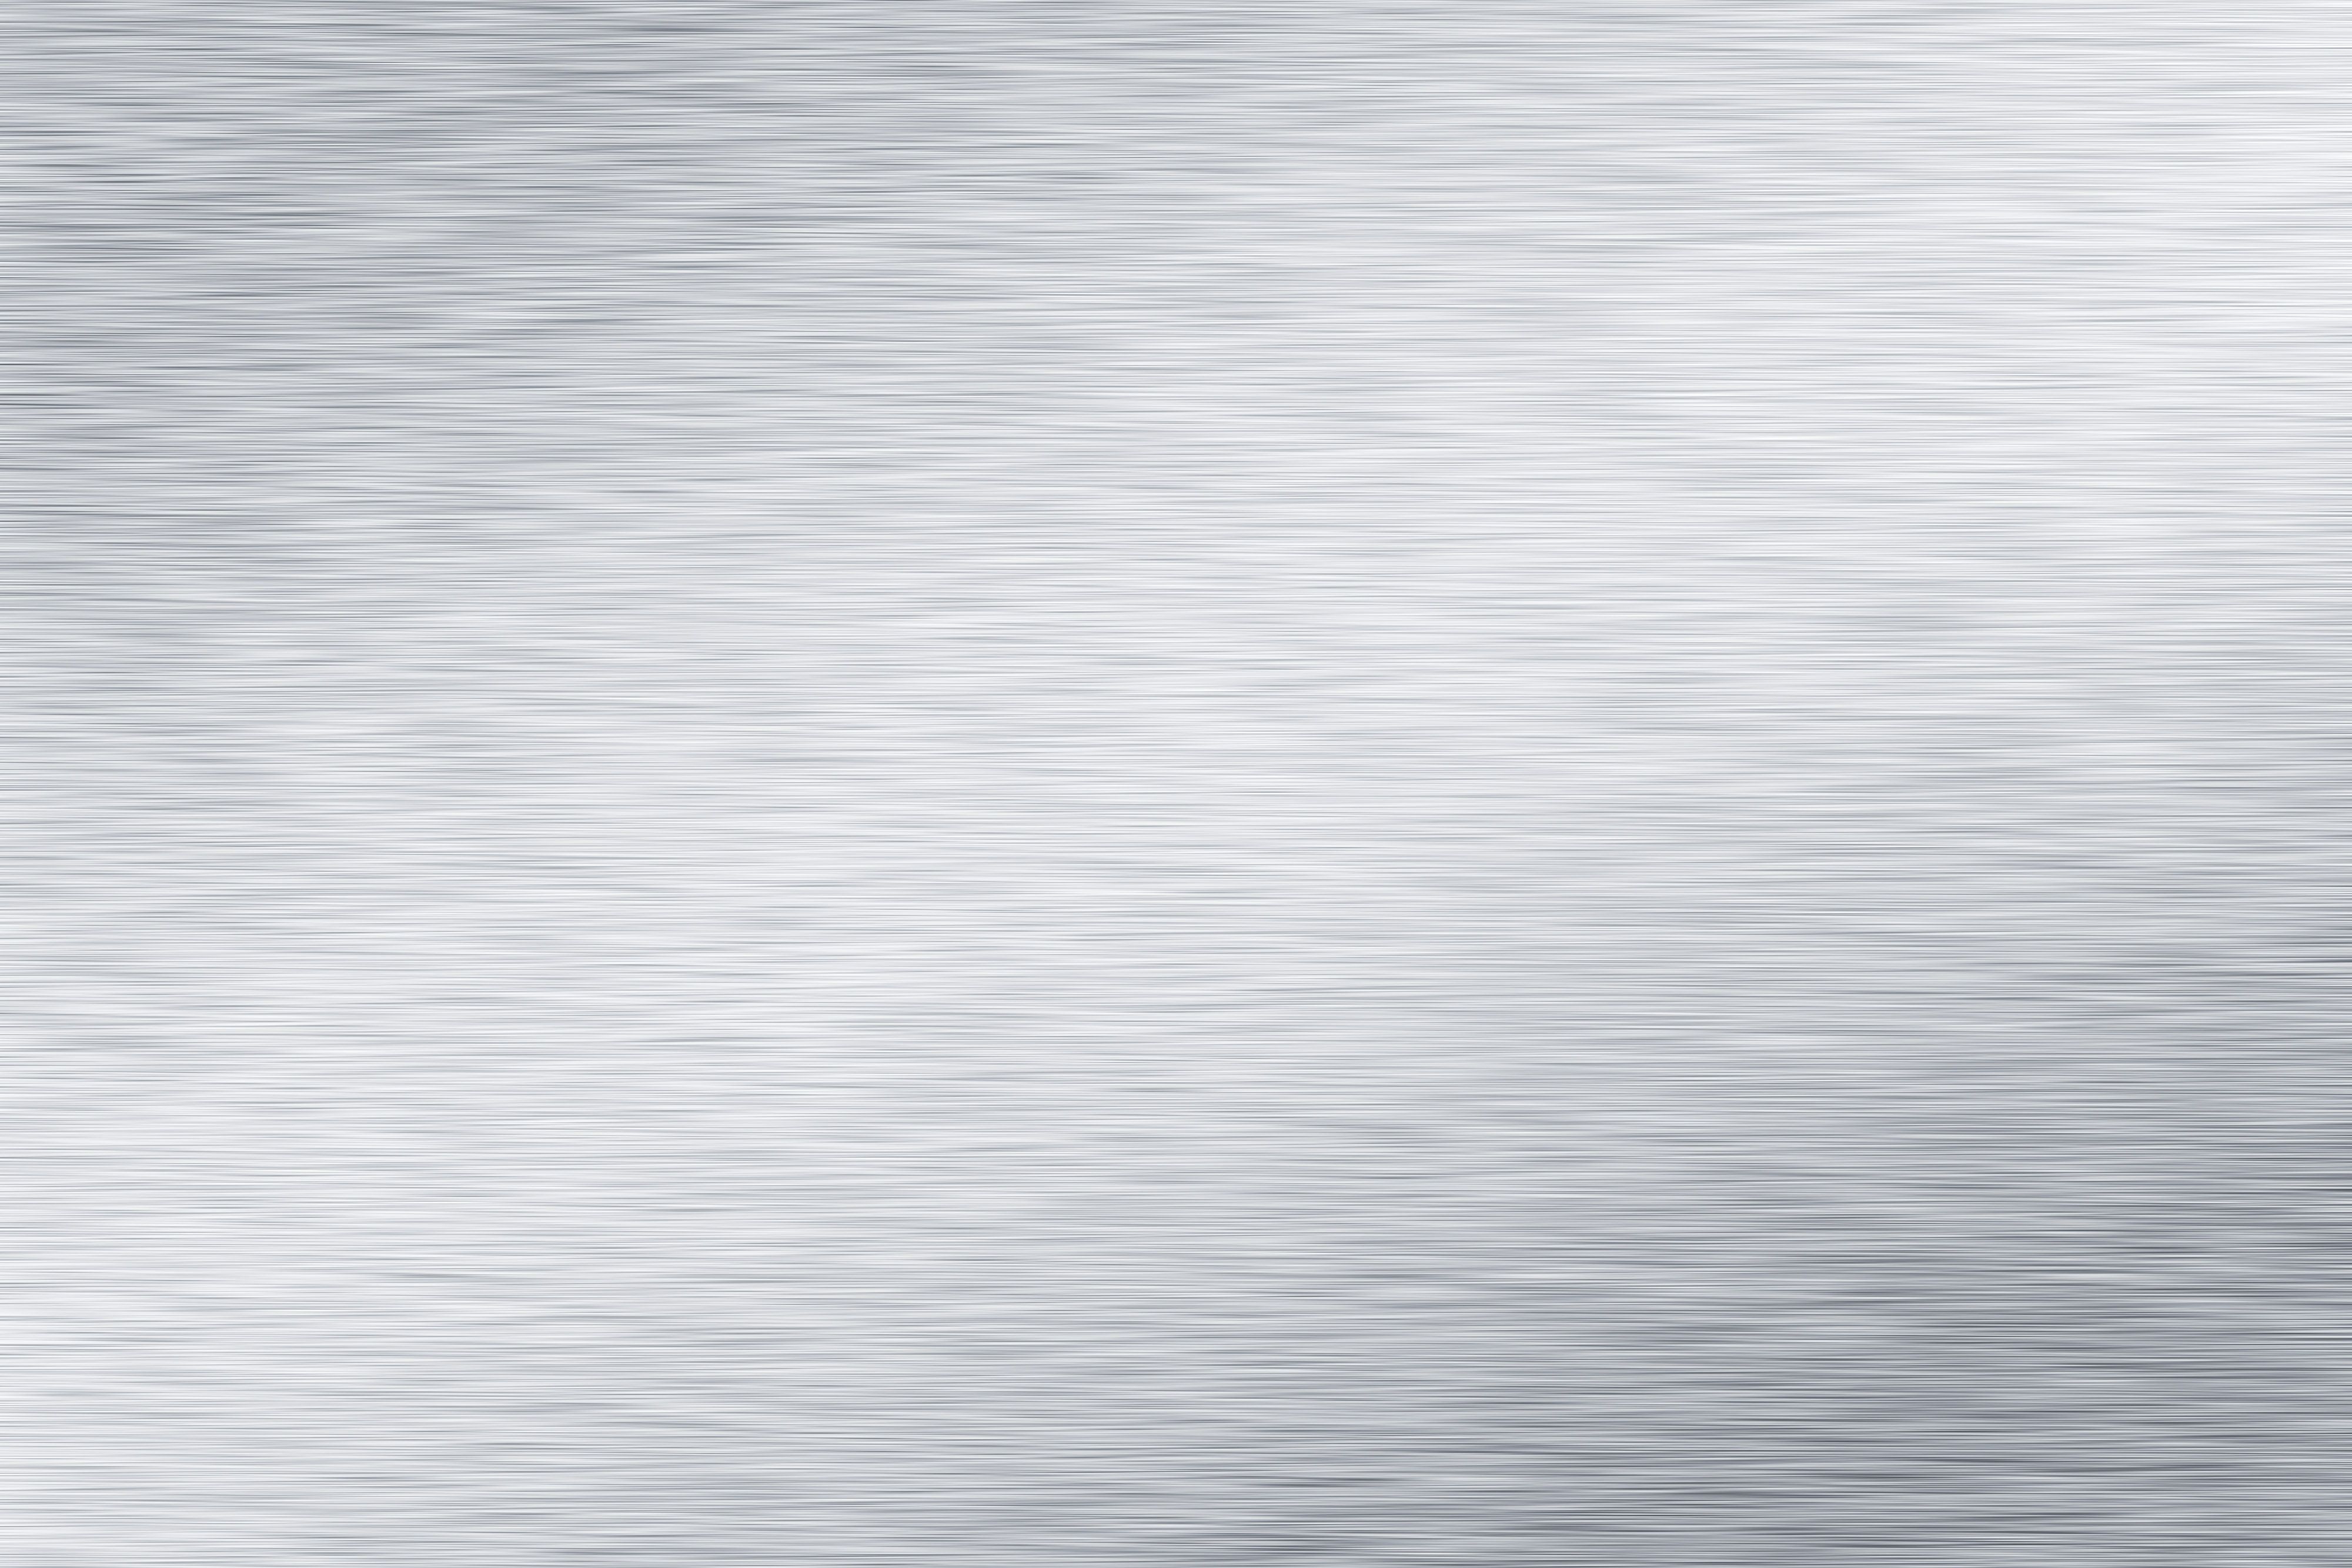 Brushed Stainless Steel Texture HD Wallpaper